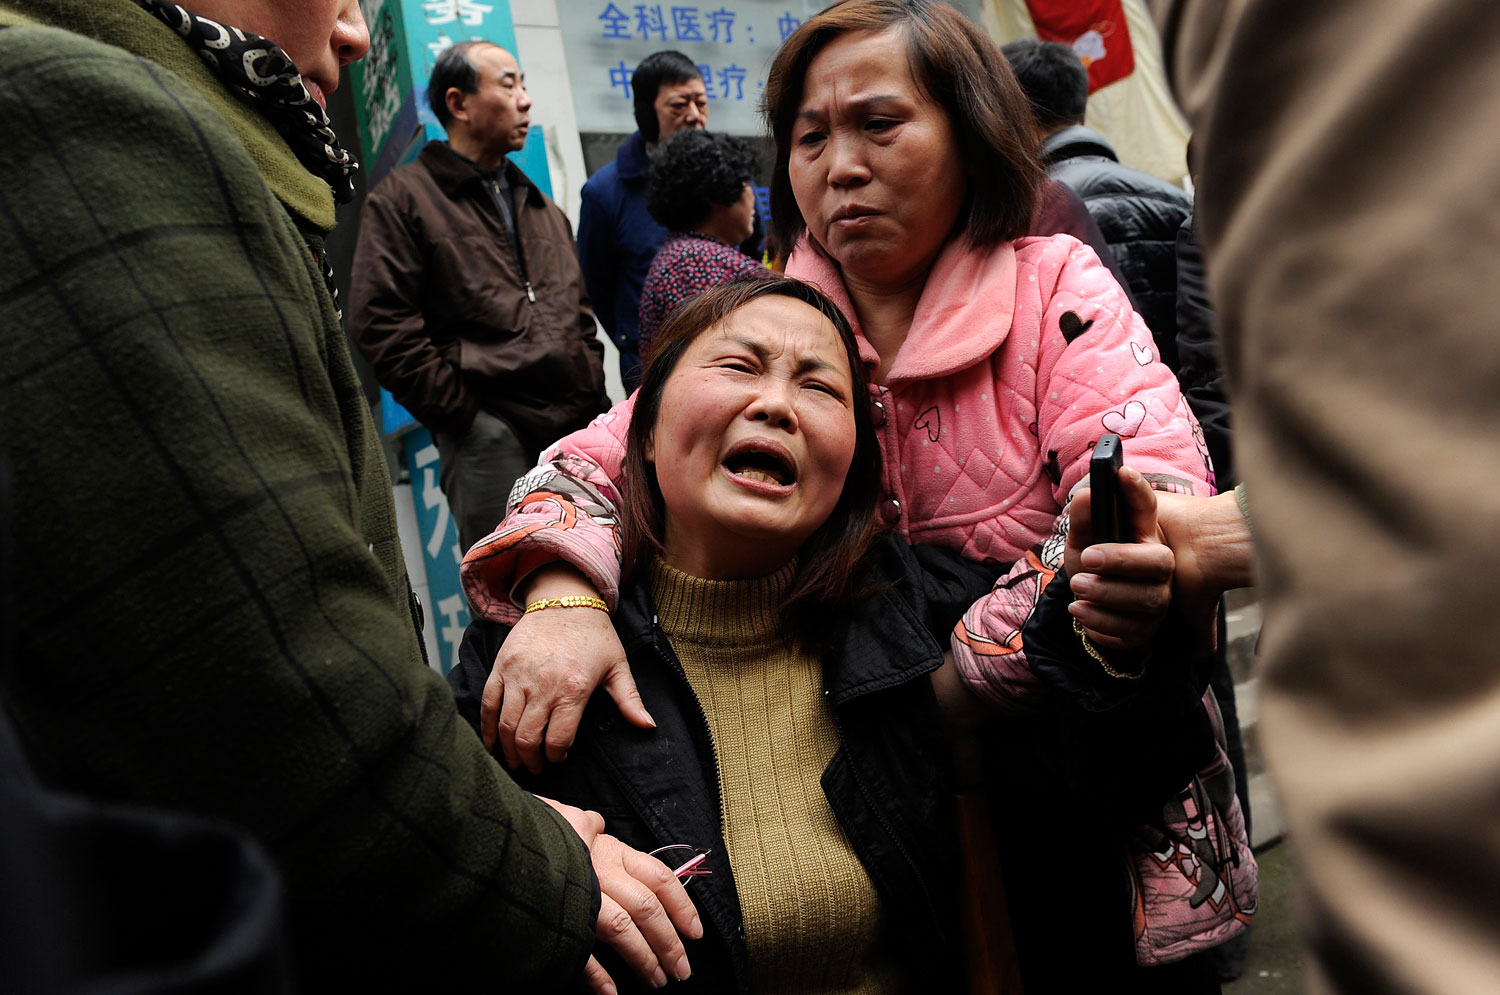 A woman cries after her parent was killed in a knifing incident in Changsha, Hunan province, China,  March 14, 2014. (Reuters)